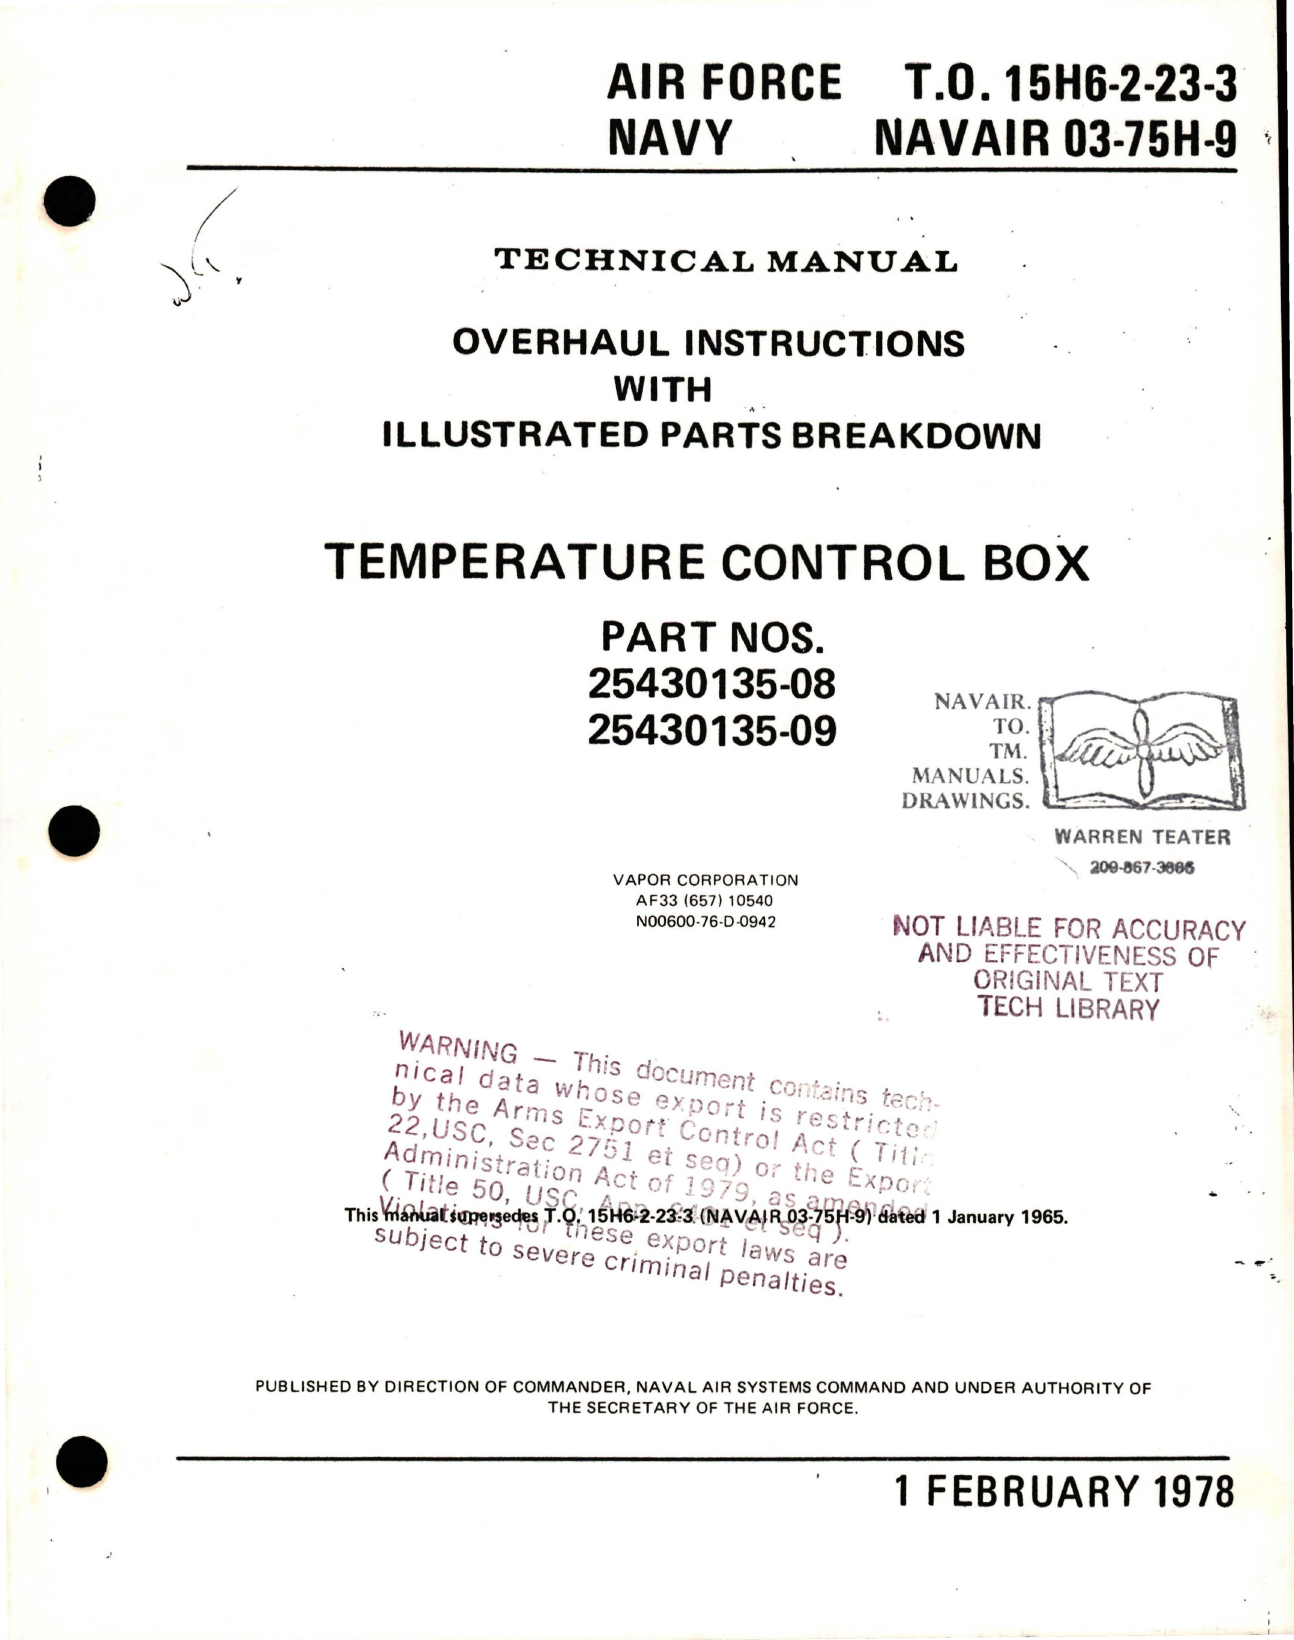 Sample page 1 from AirCorps Library document: Overhaul Instructions with Illustrated Parts Breakdown for Temperature Control Box - Parts 25430135-08, 25430135-09